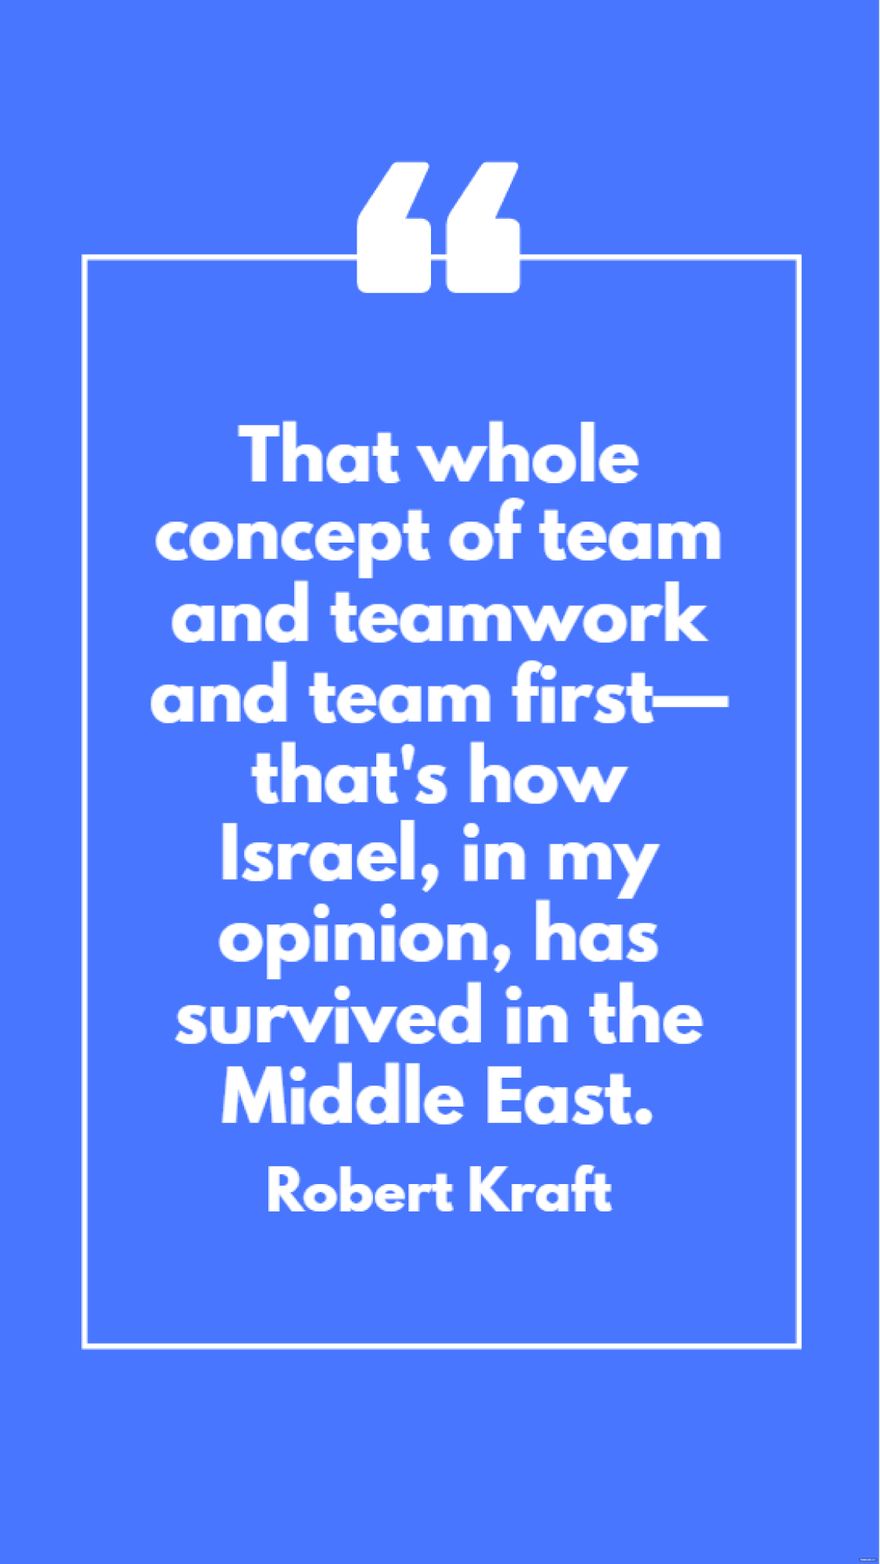 Robert Kraft - That whole concept of team and teamwork and team first - that's how Israel, in my opinion, has survived in the Middle East. in JPG